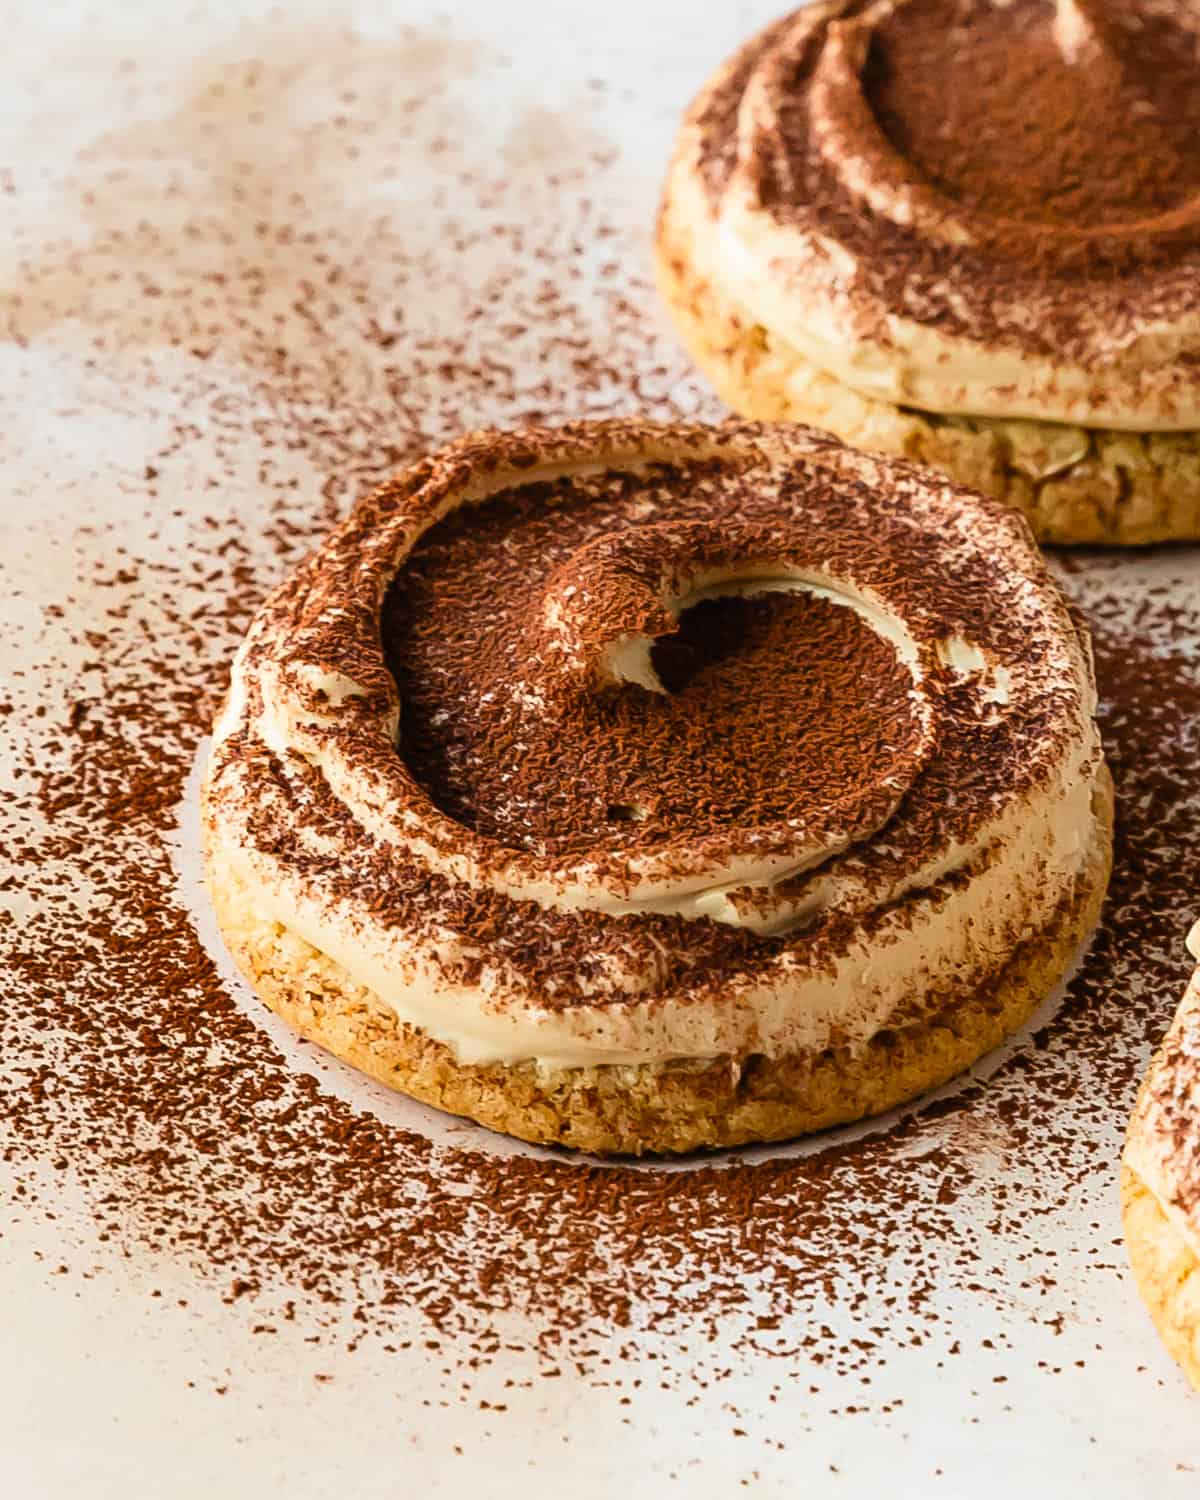 Tiramisu cookies are soft and chewy coffee sugar cookies topped with a rich a creamy espresso mascarpone frosting and a light dusting of cocoa powder. If tiramisu was a cookie, it would be these mascarpone cookies. What I love most about these tiramisu sugar cookies are that they require no chilling time, are super easy to make and taste just like the classic tiramisu dessert. 